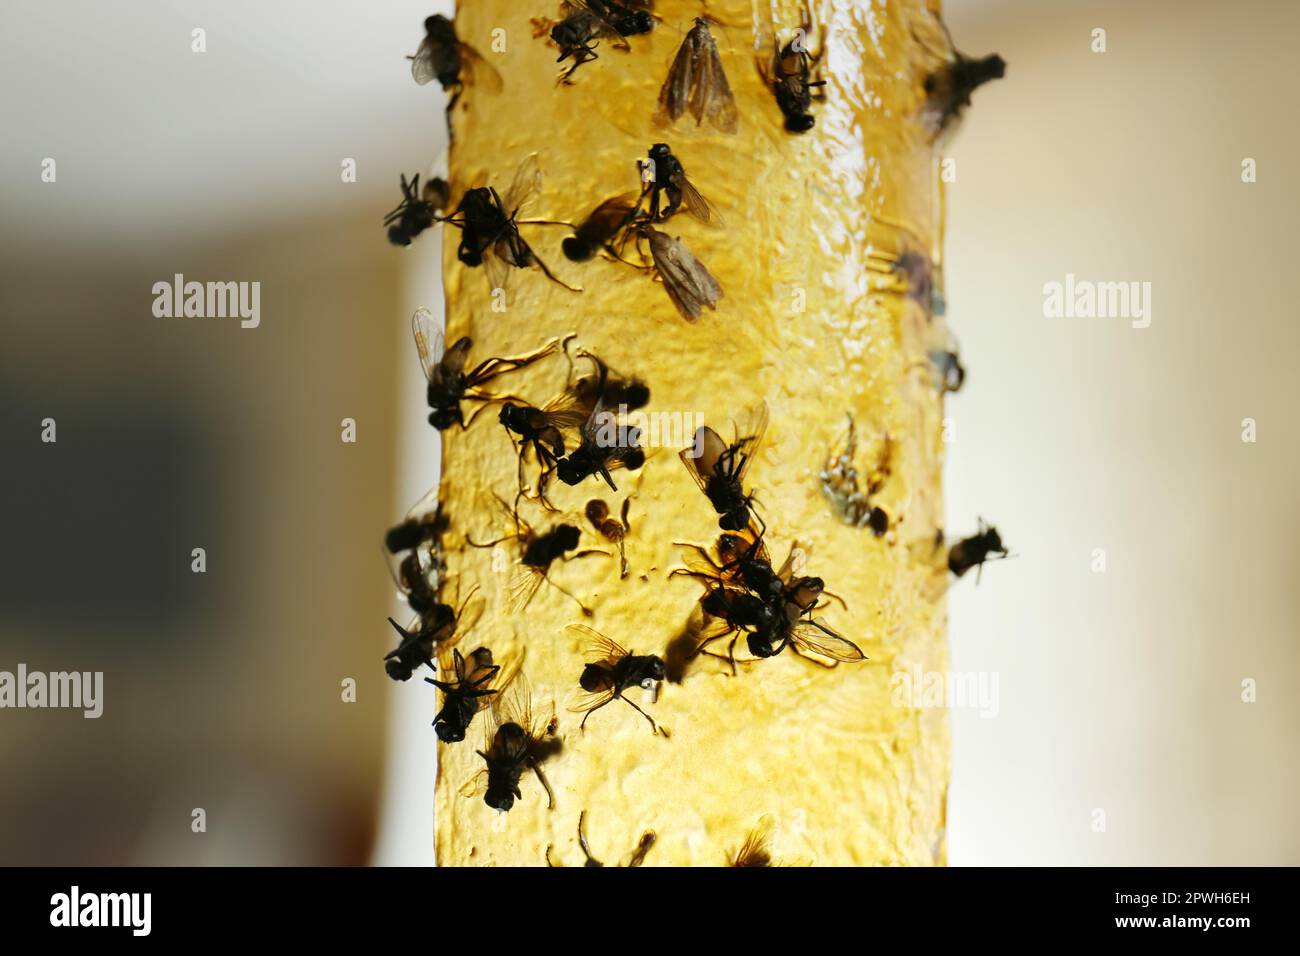 https://c8.alamy.com/comp/2PWH6EH/sticky-insect-tape-with-dead-flies-on-blurred-background-closeup-2PWH6EH.jpg